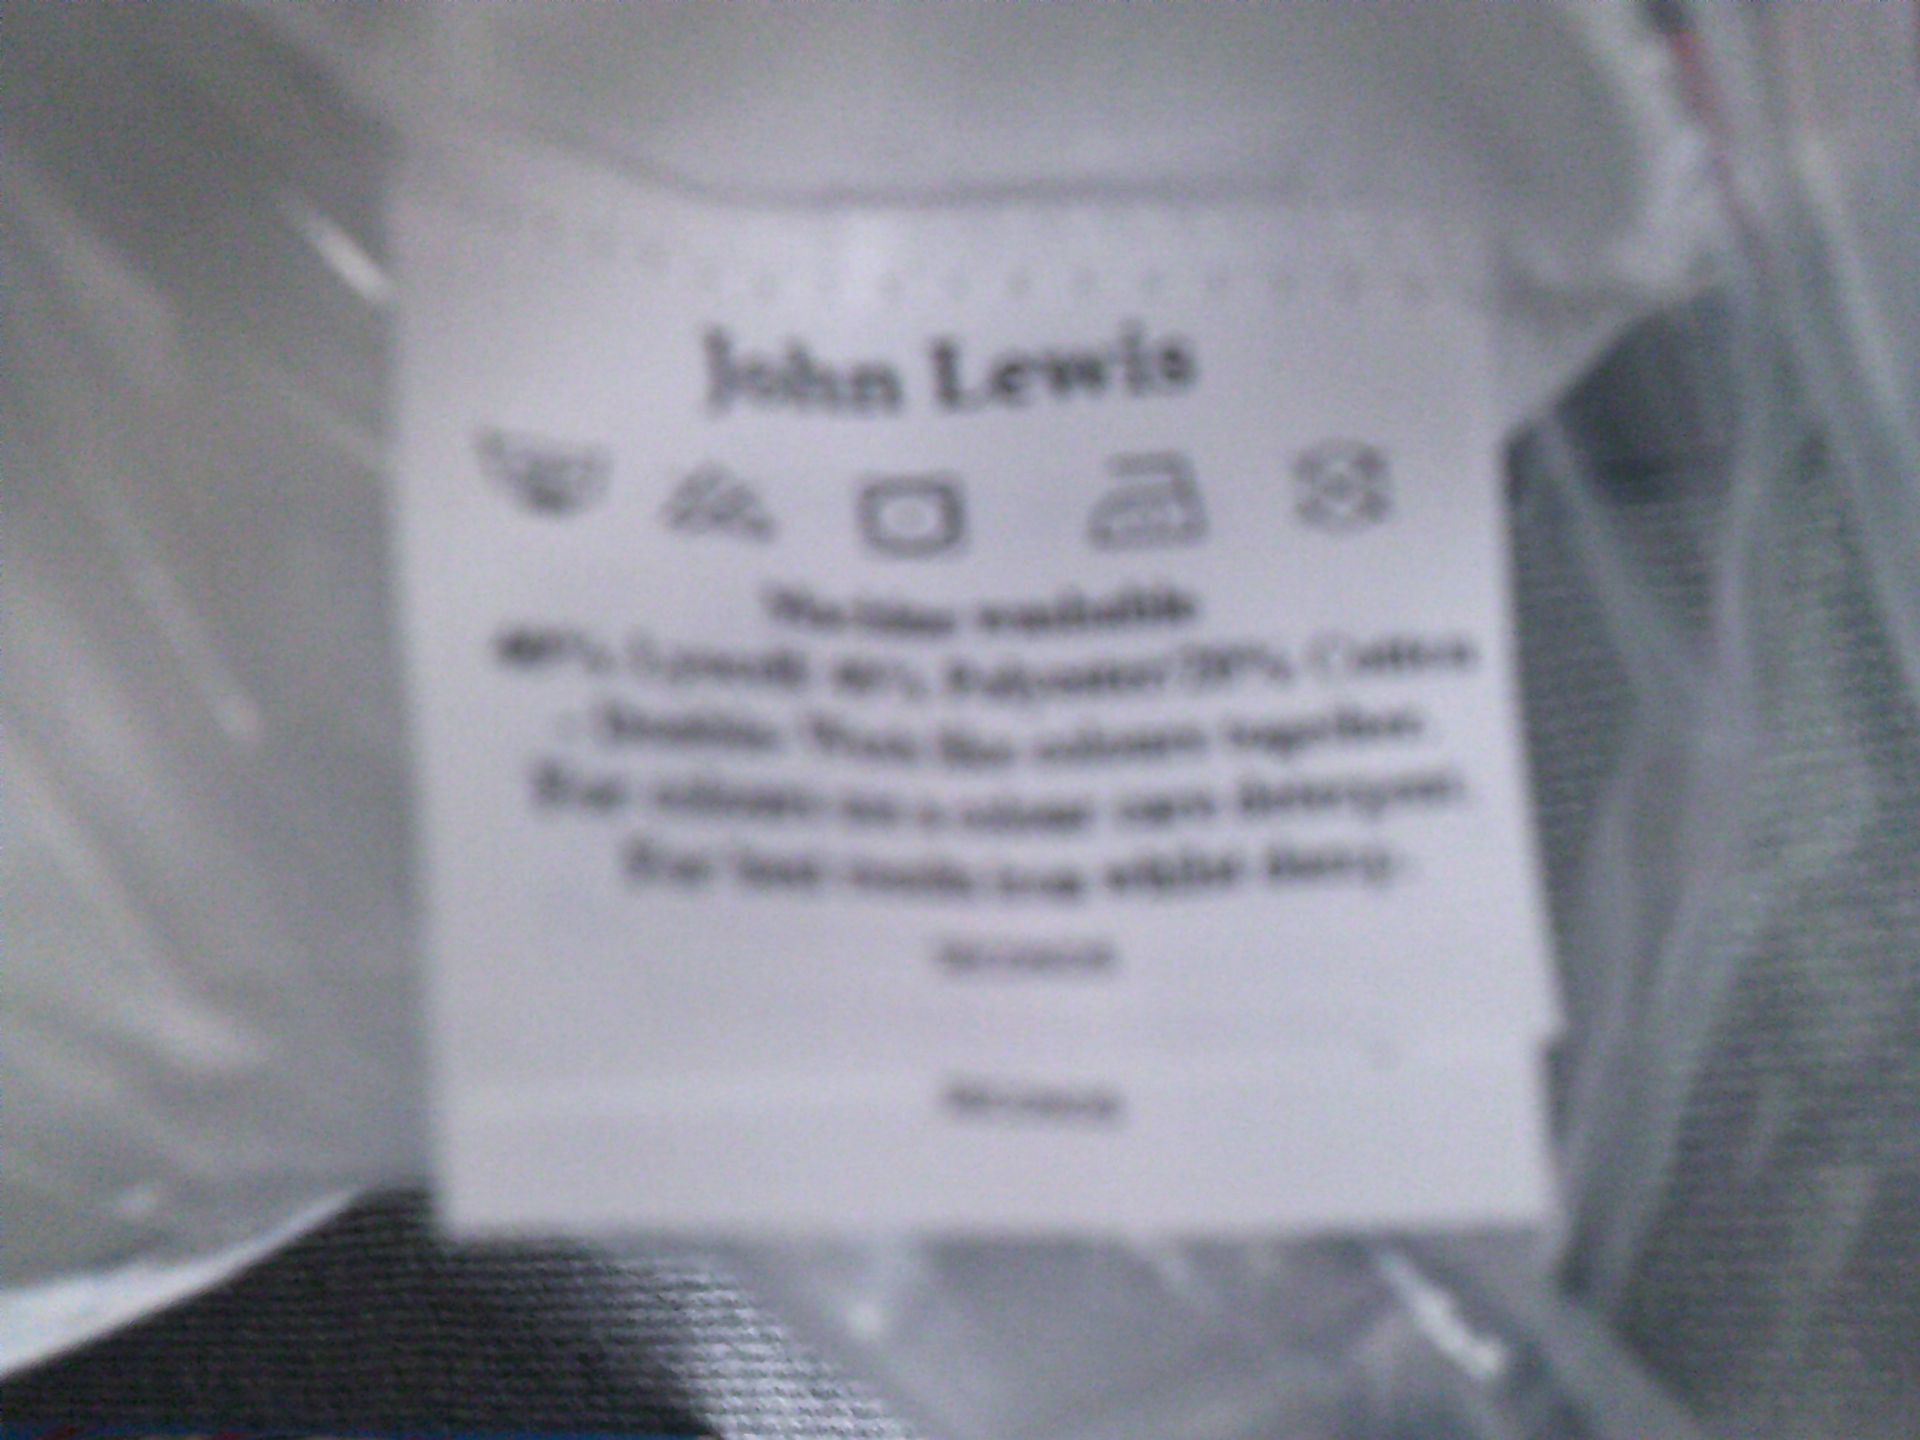 Pair of 2 John Lewis Overmake Pillows (Delivery Band A)